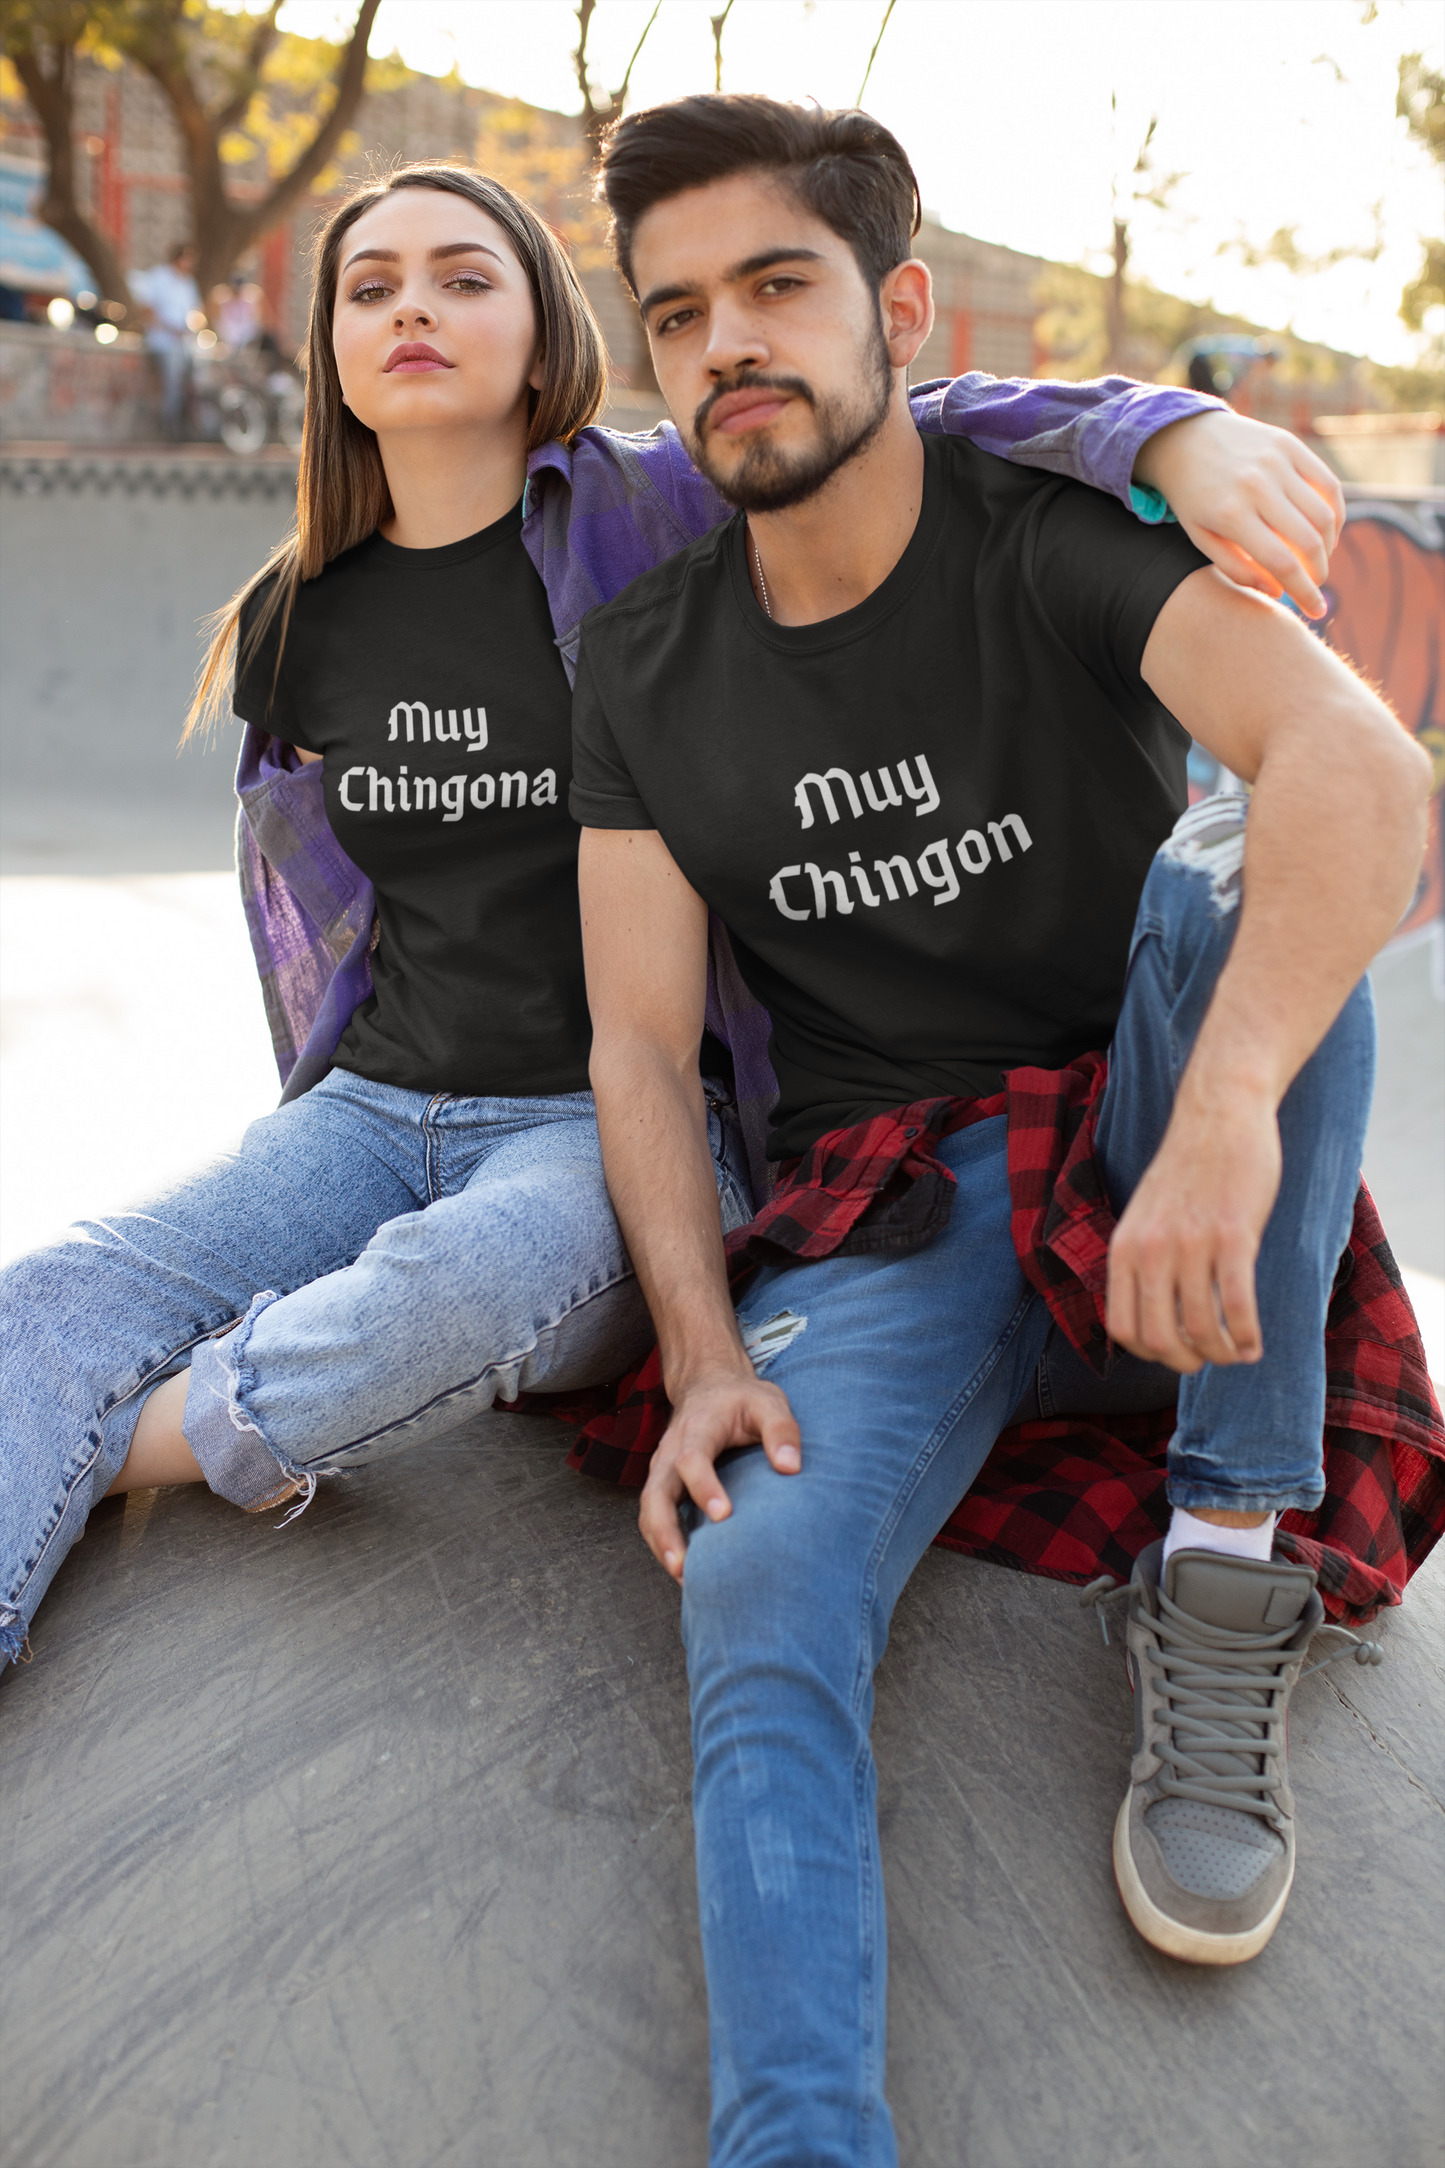 Muy Chingon - Obnoxious Apparel - Funny Offensive Shirts for Men